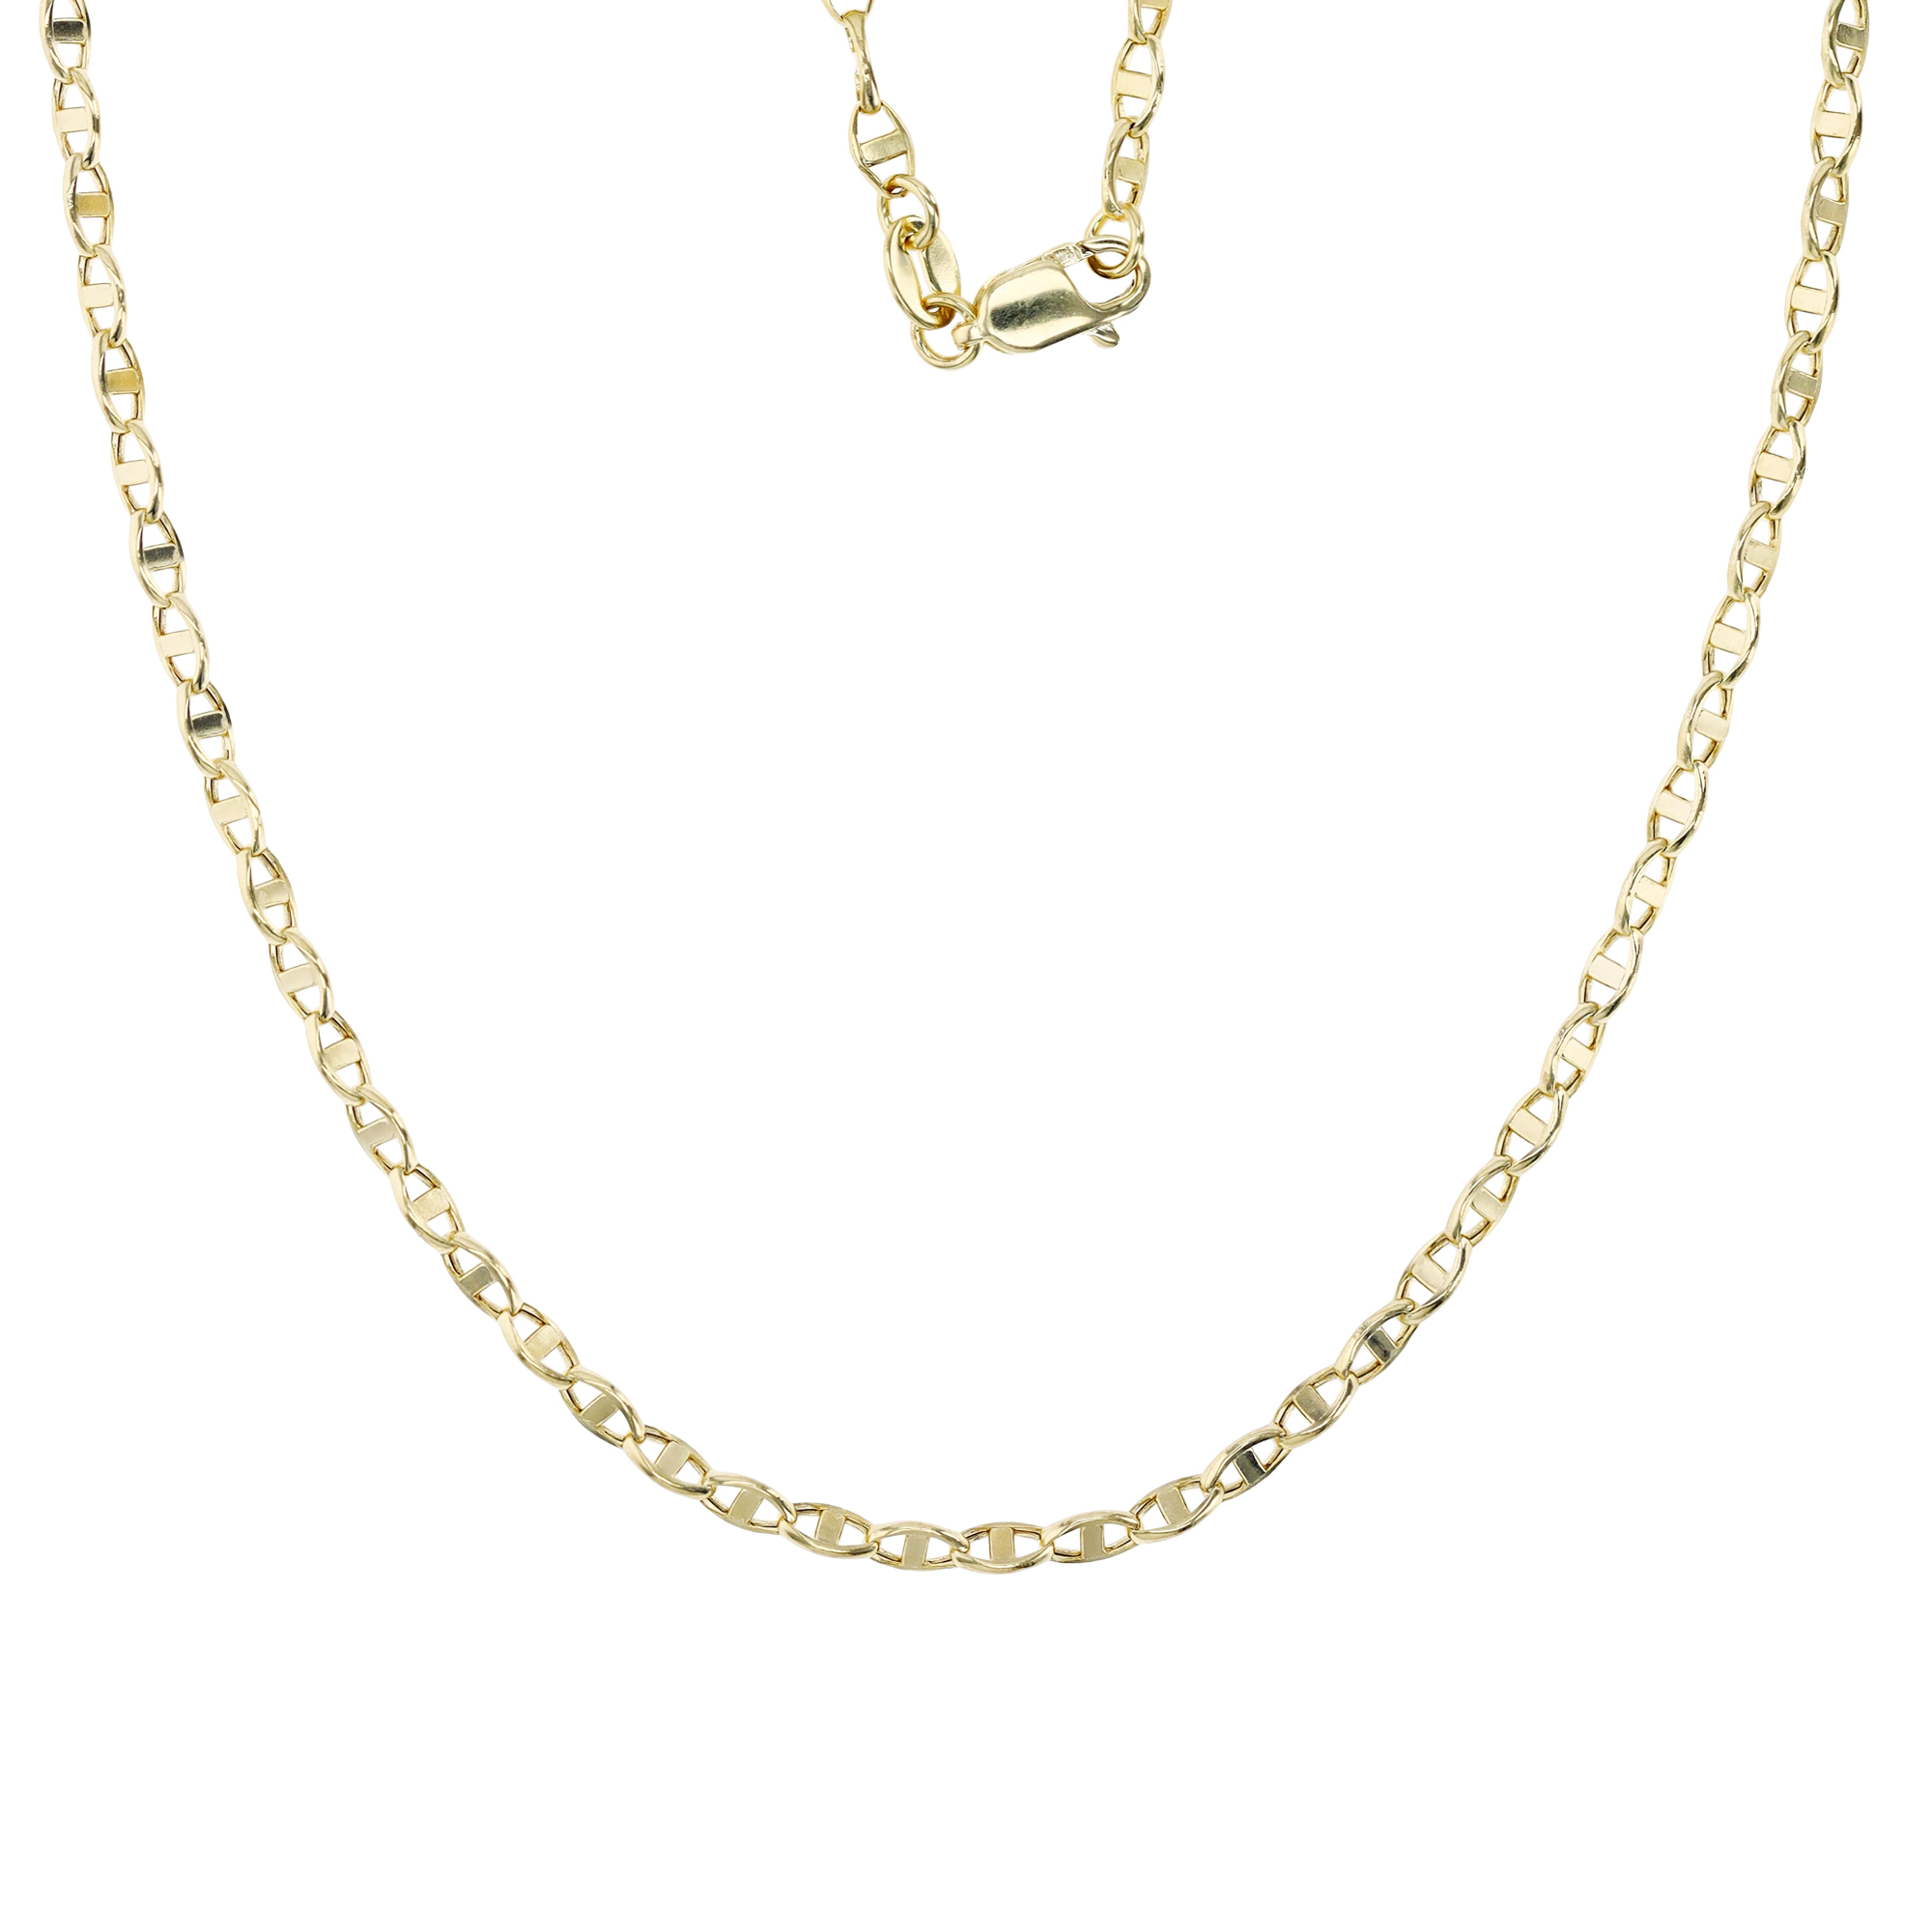 14K Yellow Gold 2.75MM Anchor 24" Chain